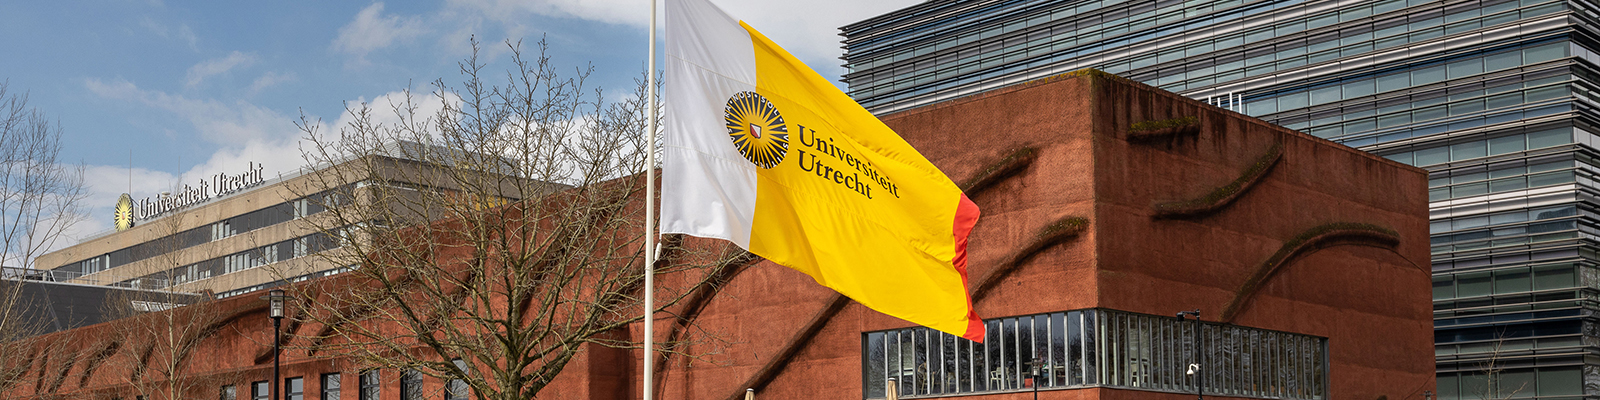 Outside image with the UU flag and Minnaert building.